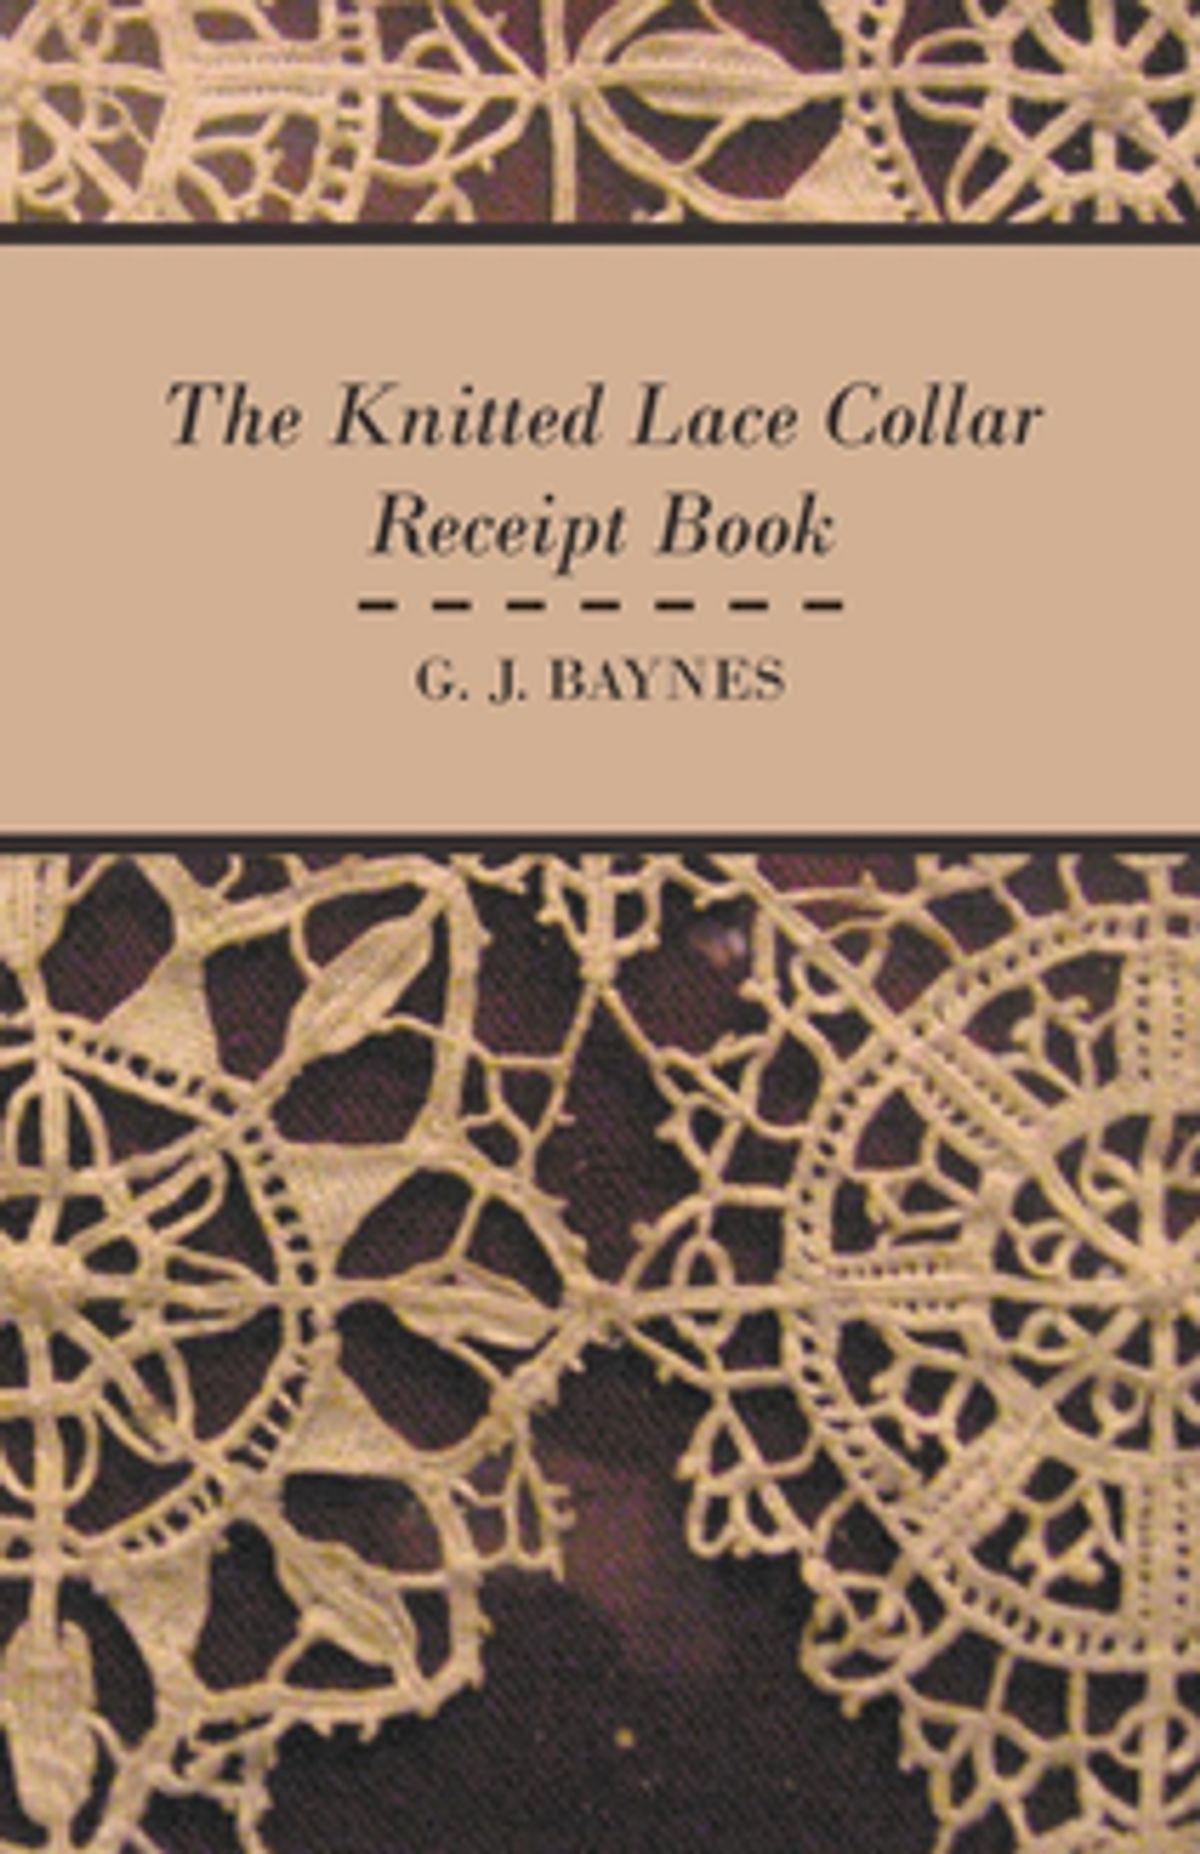 Knitted Lace Pattern The Knitted Lace Collar Receipt Book Ebook G J Baynes Rakuten Kobo